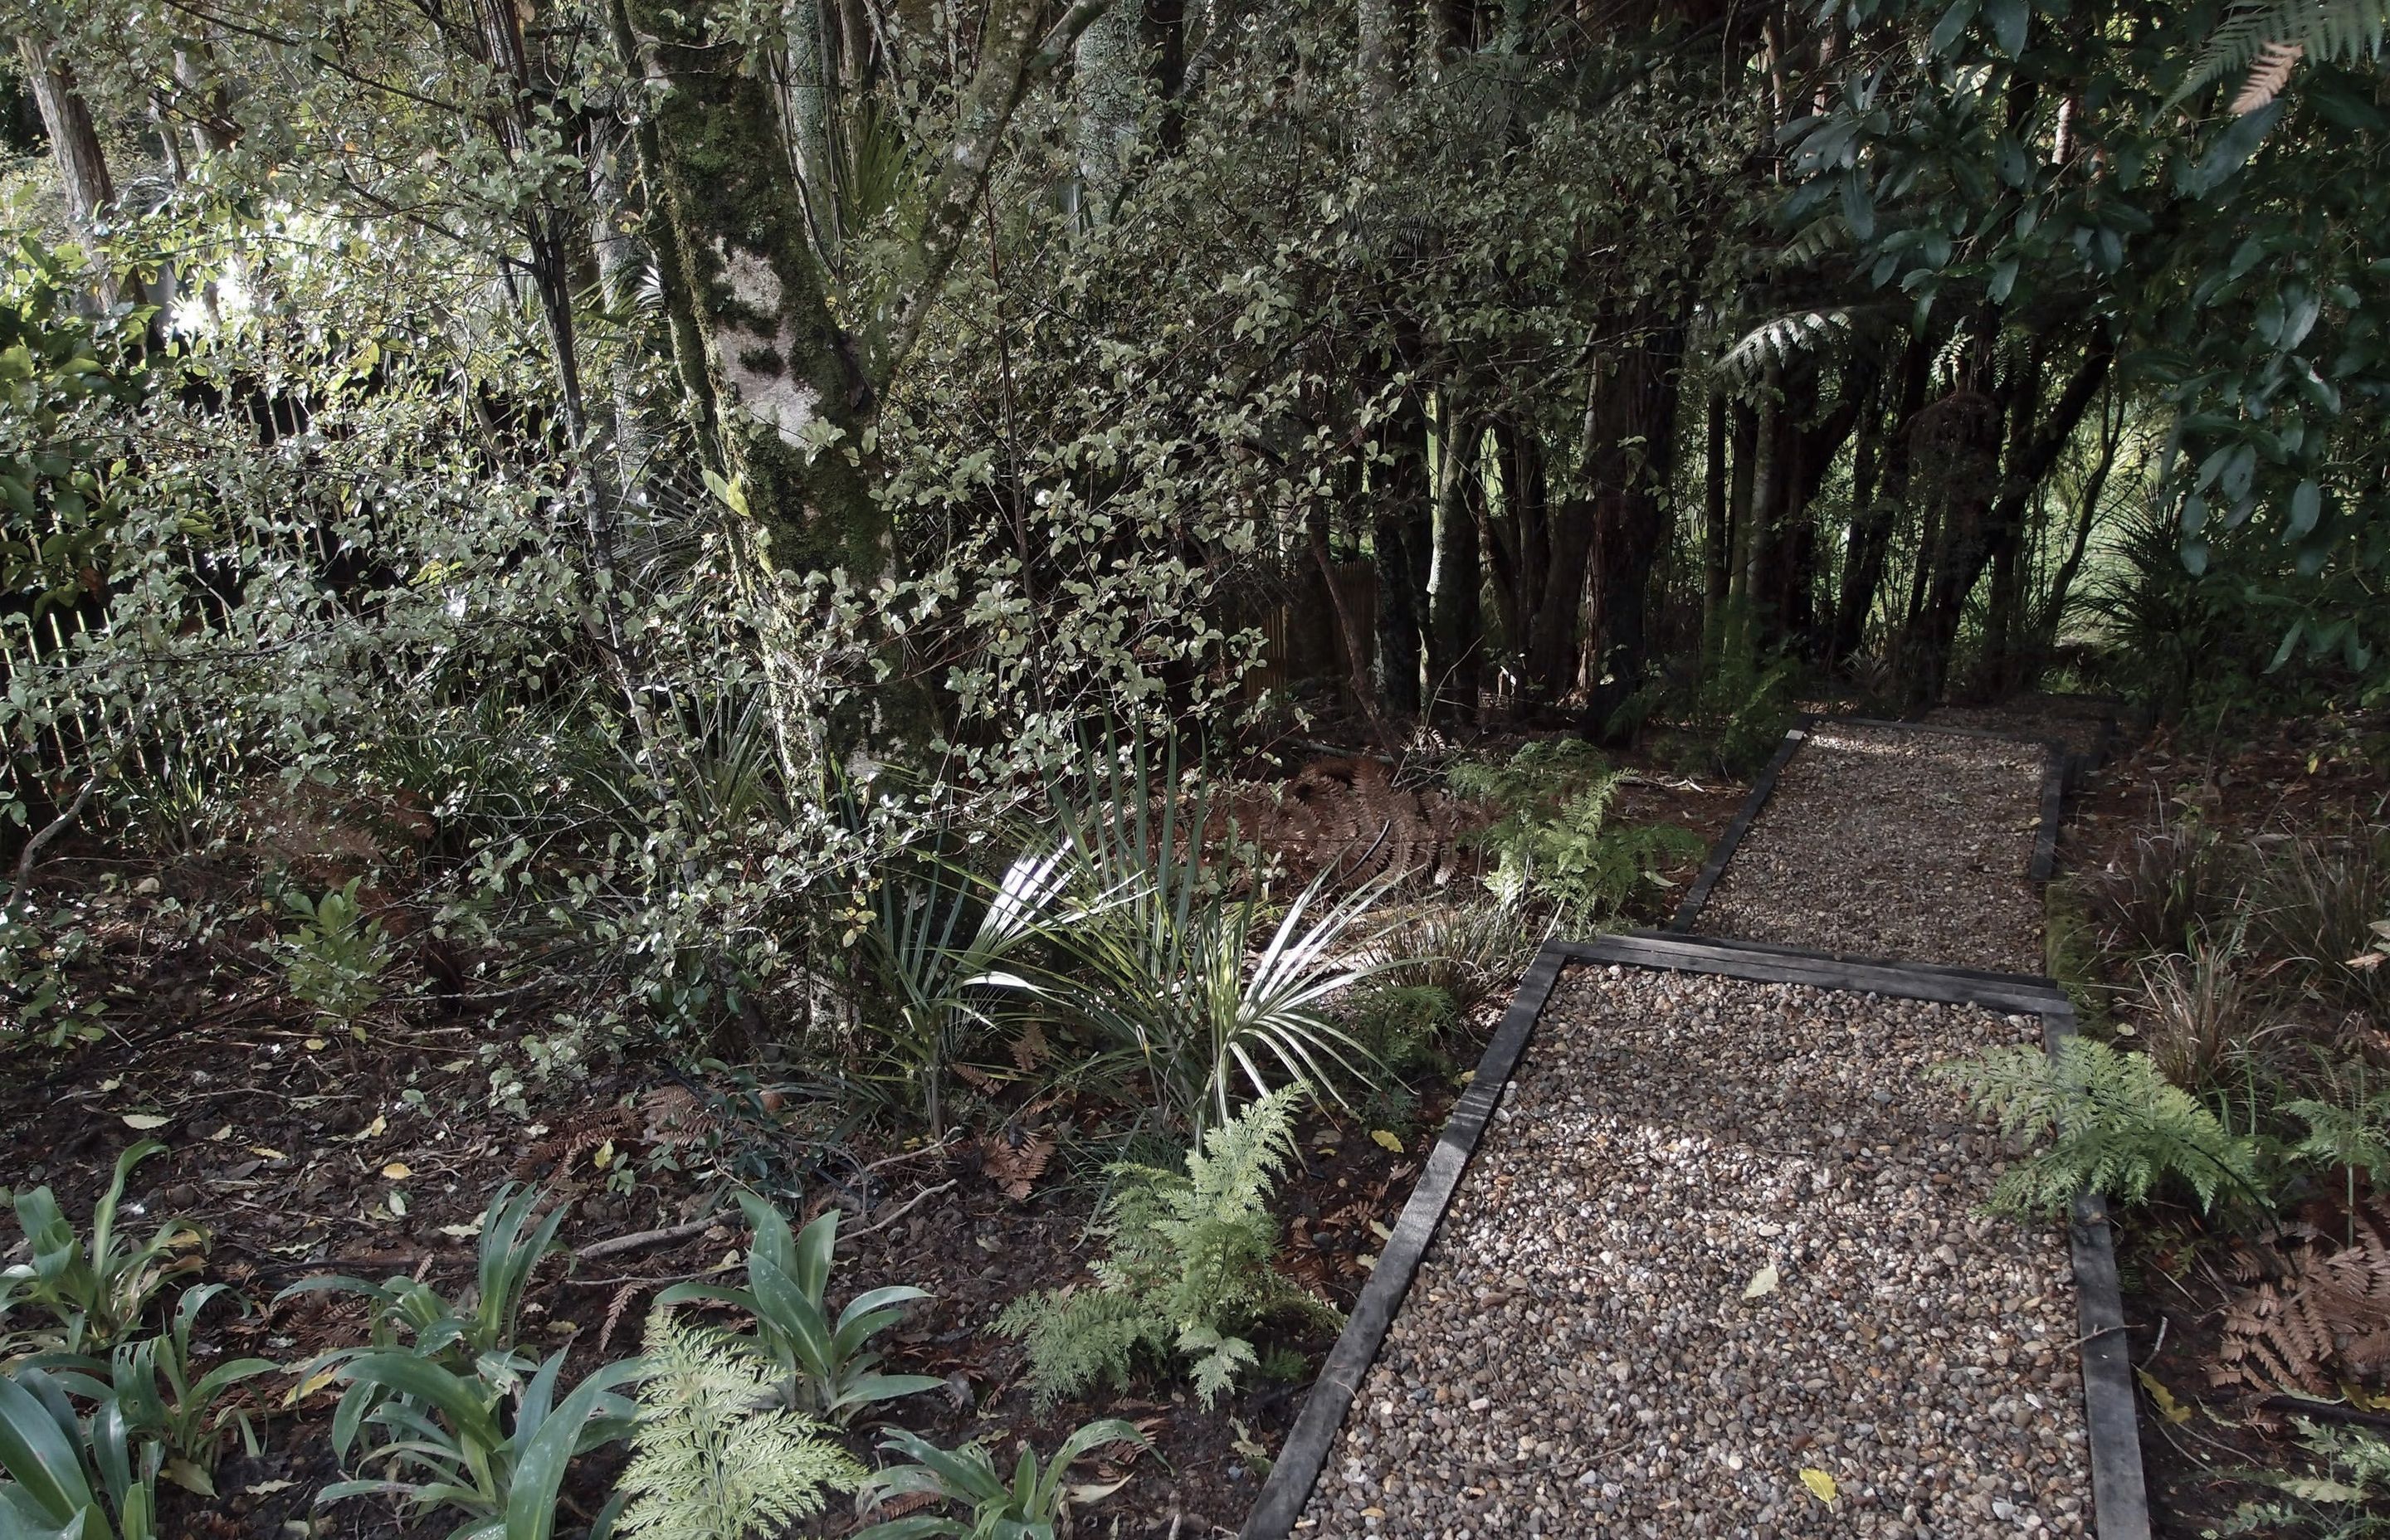 A simple gravel path leads down to the stream through the established bush, underplanted with native ferns and ground layer plants